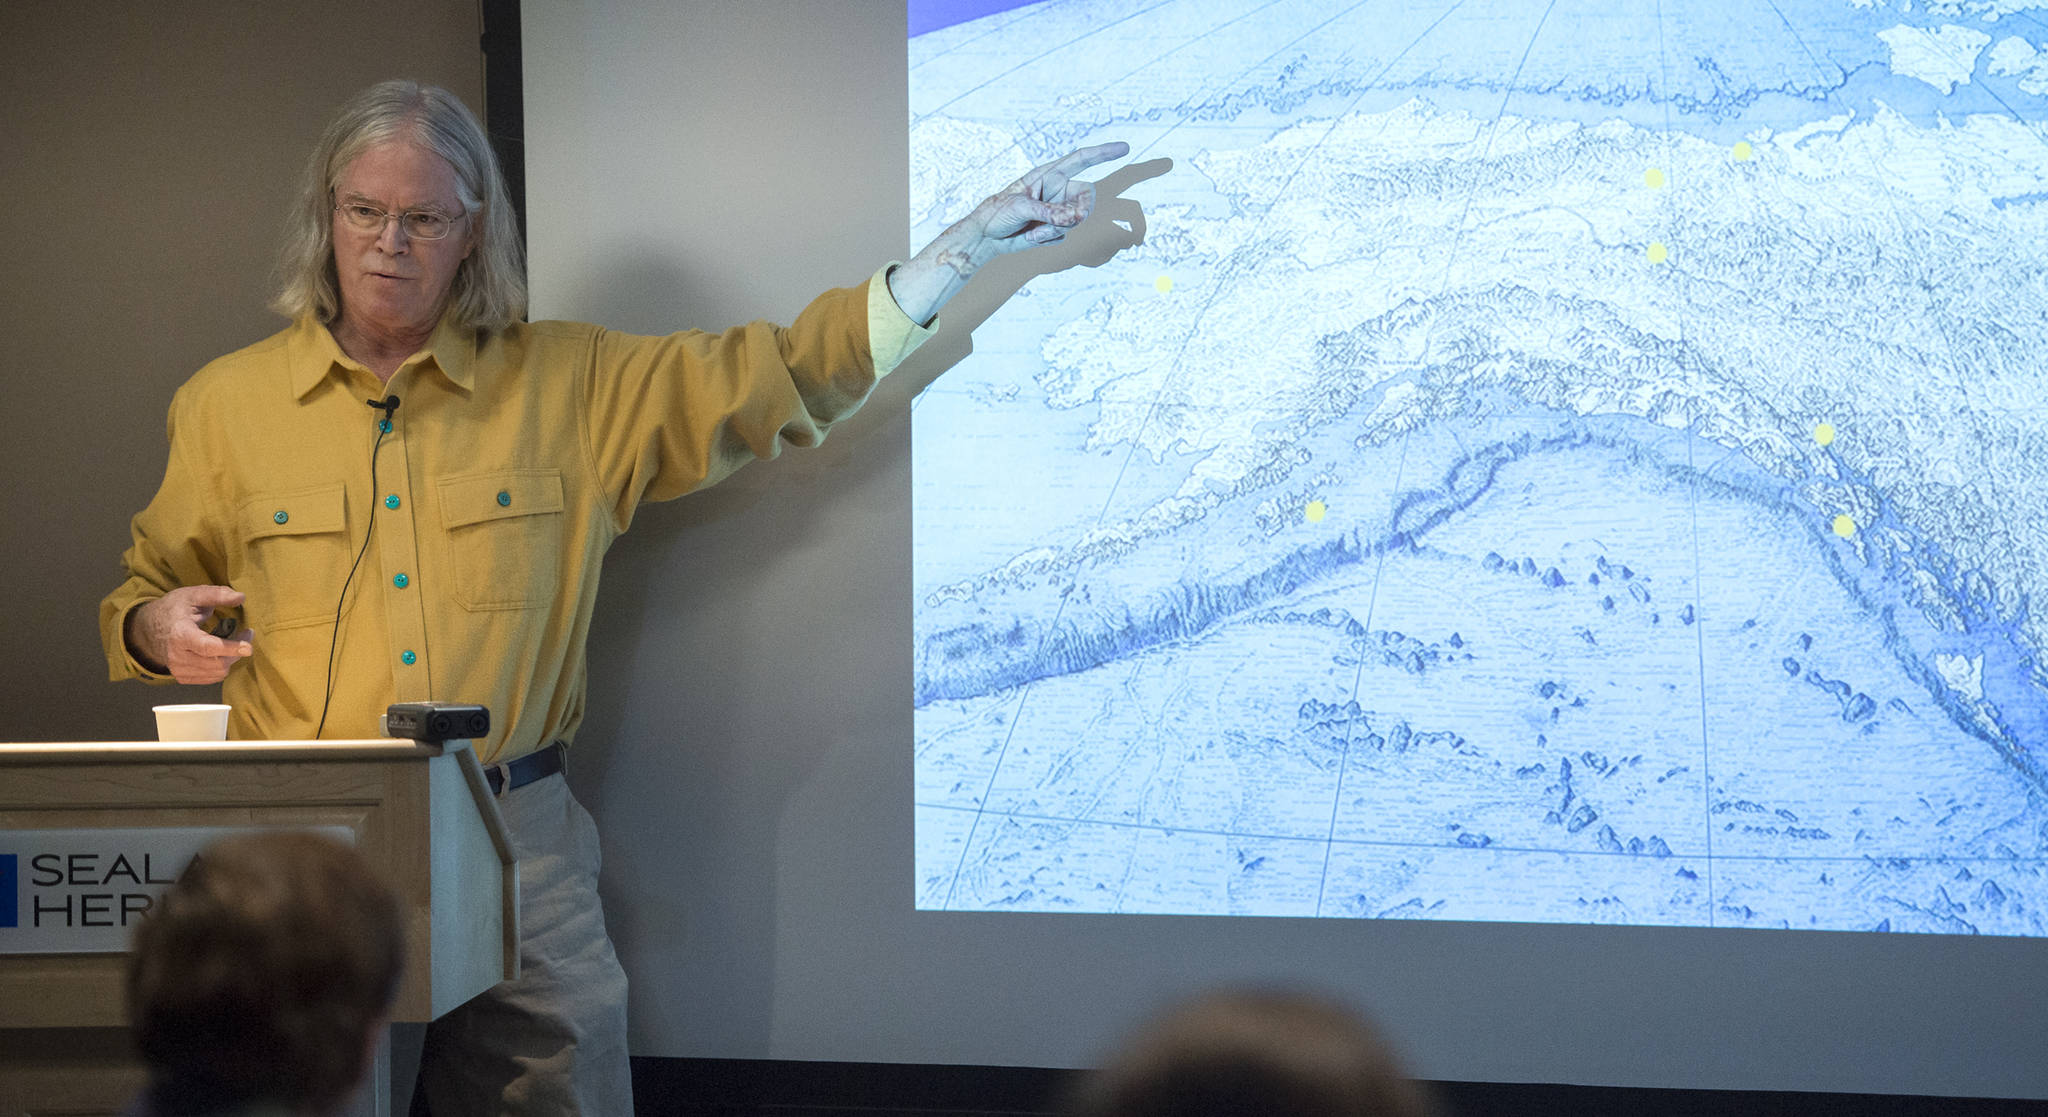 John Cloud, an independent historian of geography and cartography, gives a lecture titled “The Treaty of Cession, as Seen through the Lenses of Art, Cartography, and Photography,” at the Walter Soboleff Center on Wednesday, Nov. 15, 2017. (Michael Penn | Juneau Empire)